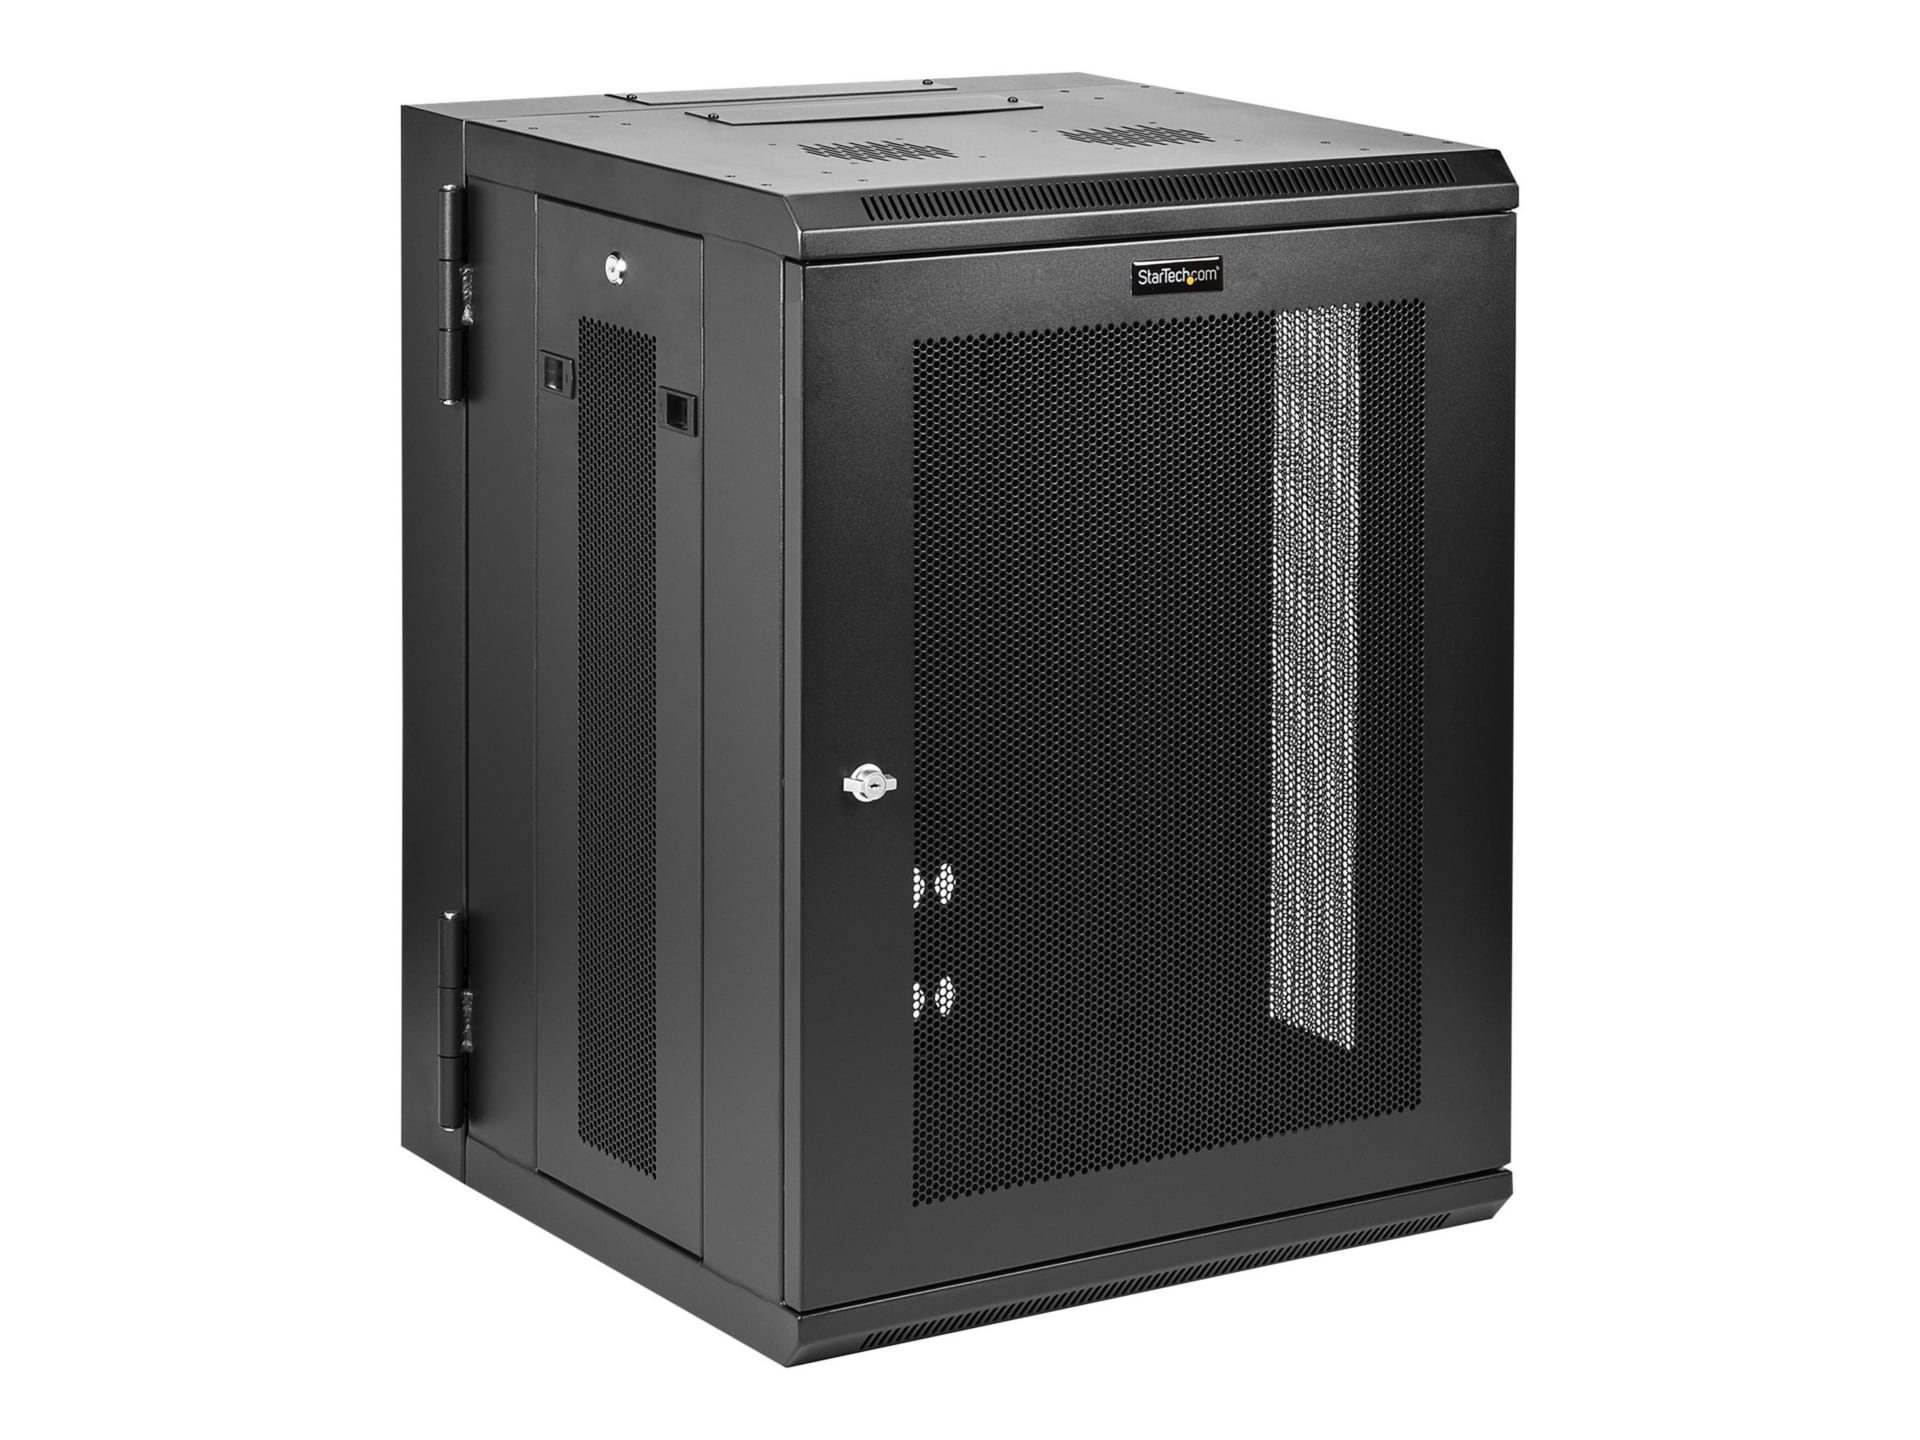 StarTech.com 4-Post 15U Wall Mount Network Cabinet, 19" Hinged Wall-Mounted Server Rack Enclosure for IT Equipment